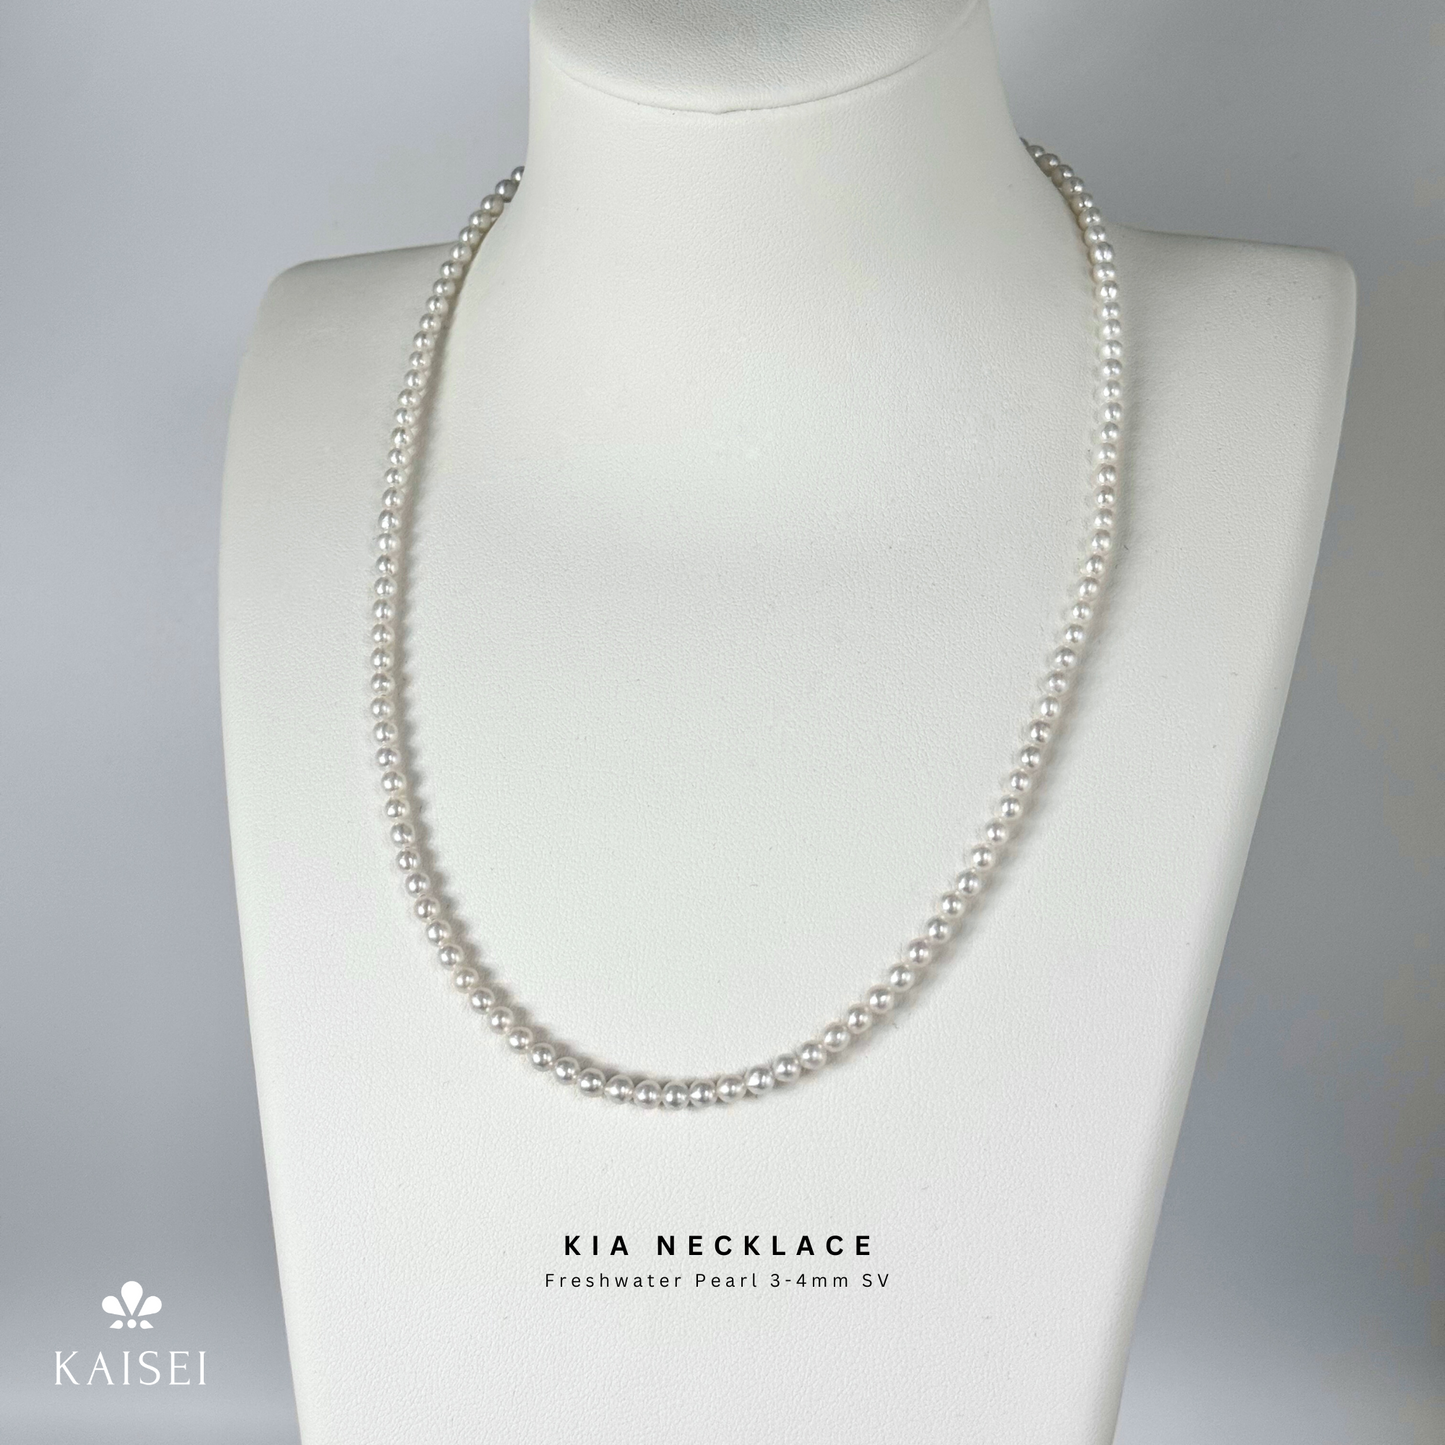 Kaisei Pearl - Kia Necklace Baby Pearl 3-4mm Freshwater Pearl Necklace Jewelry